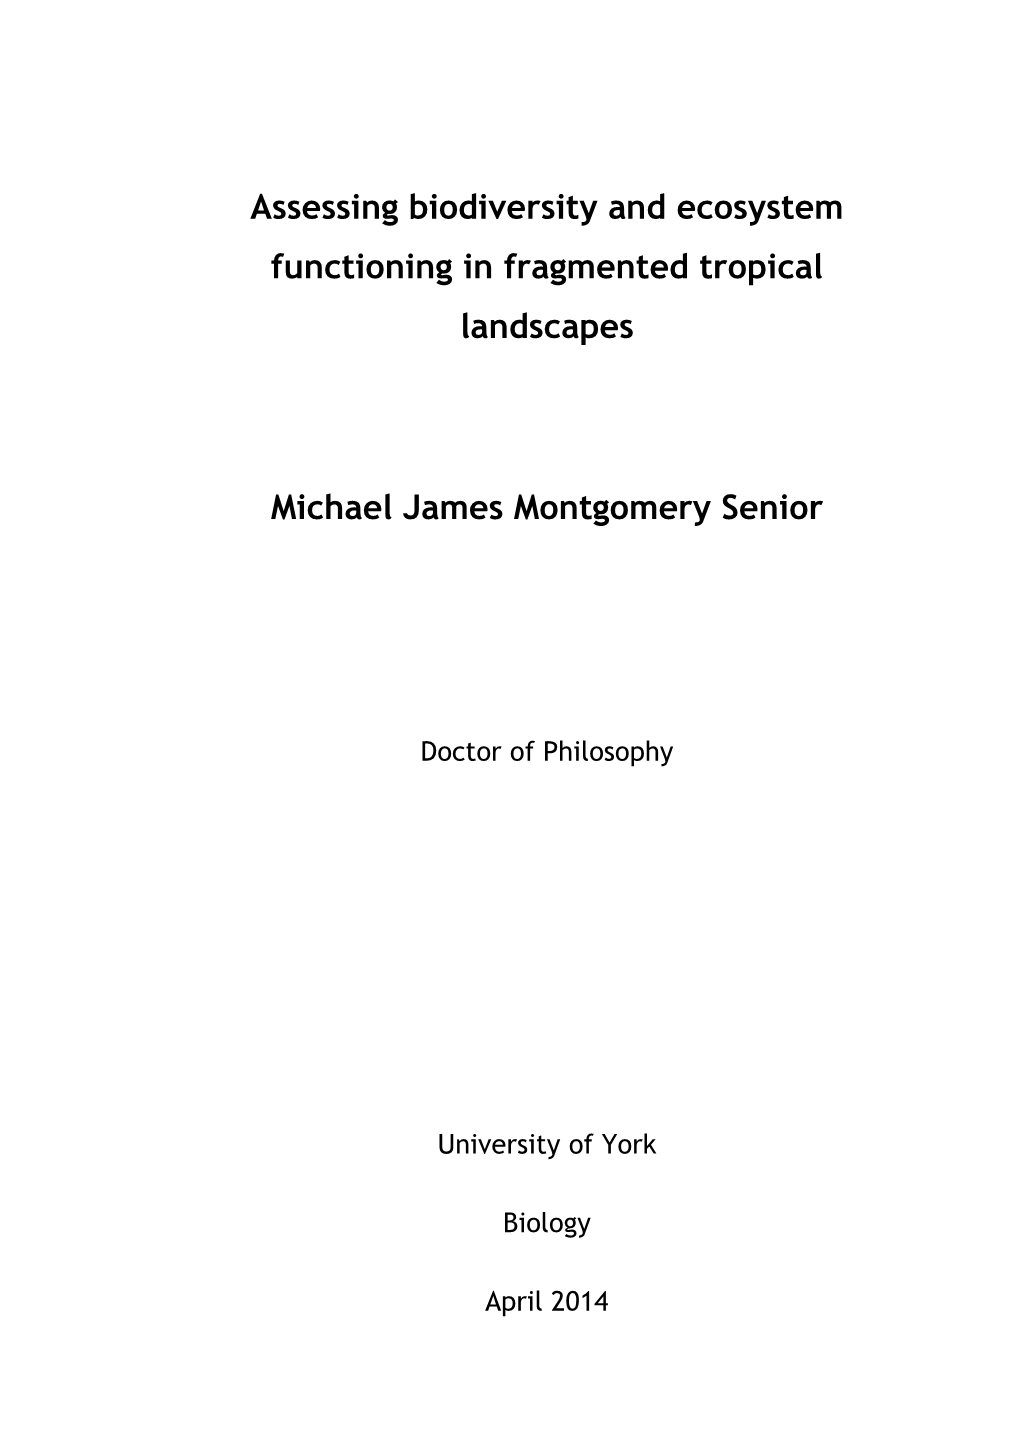 Assessing Biodiversity and Ecosystem Functioning in Fragmented Tropical Landscapes Michael James Montgomery Senior